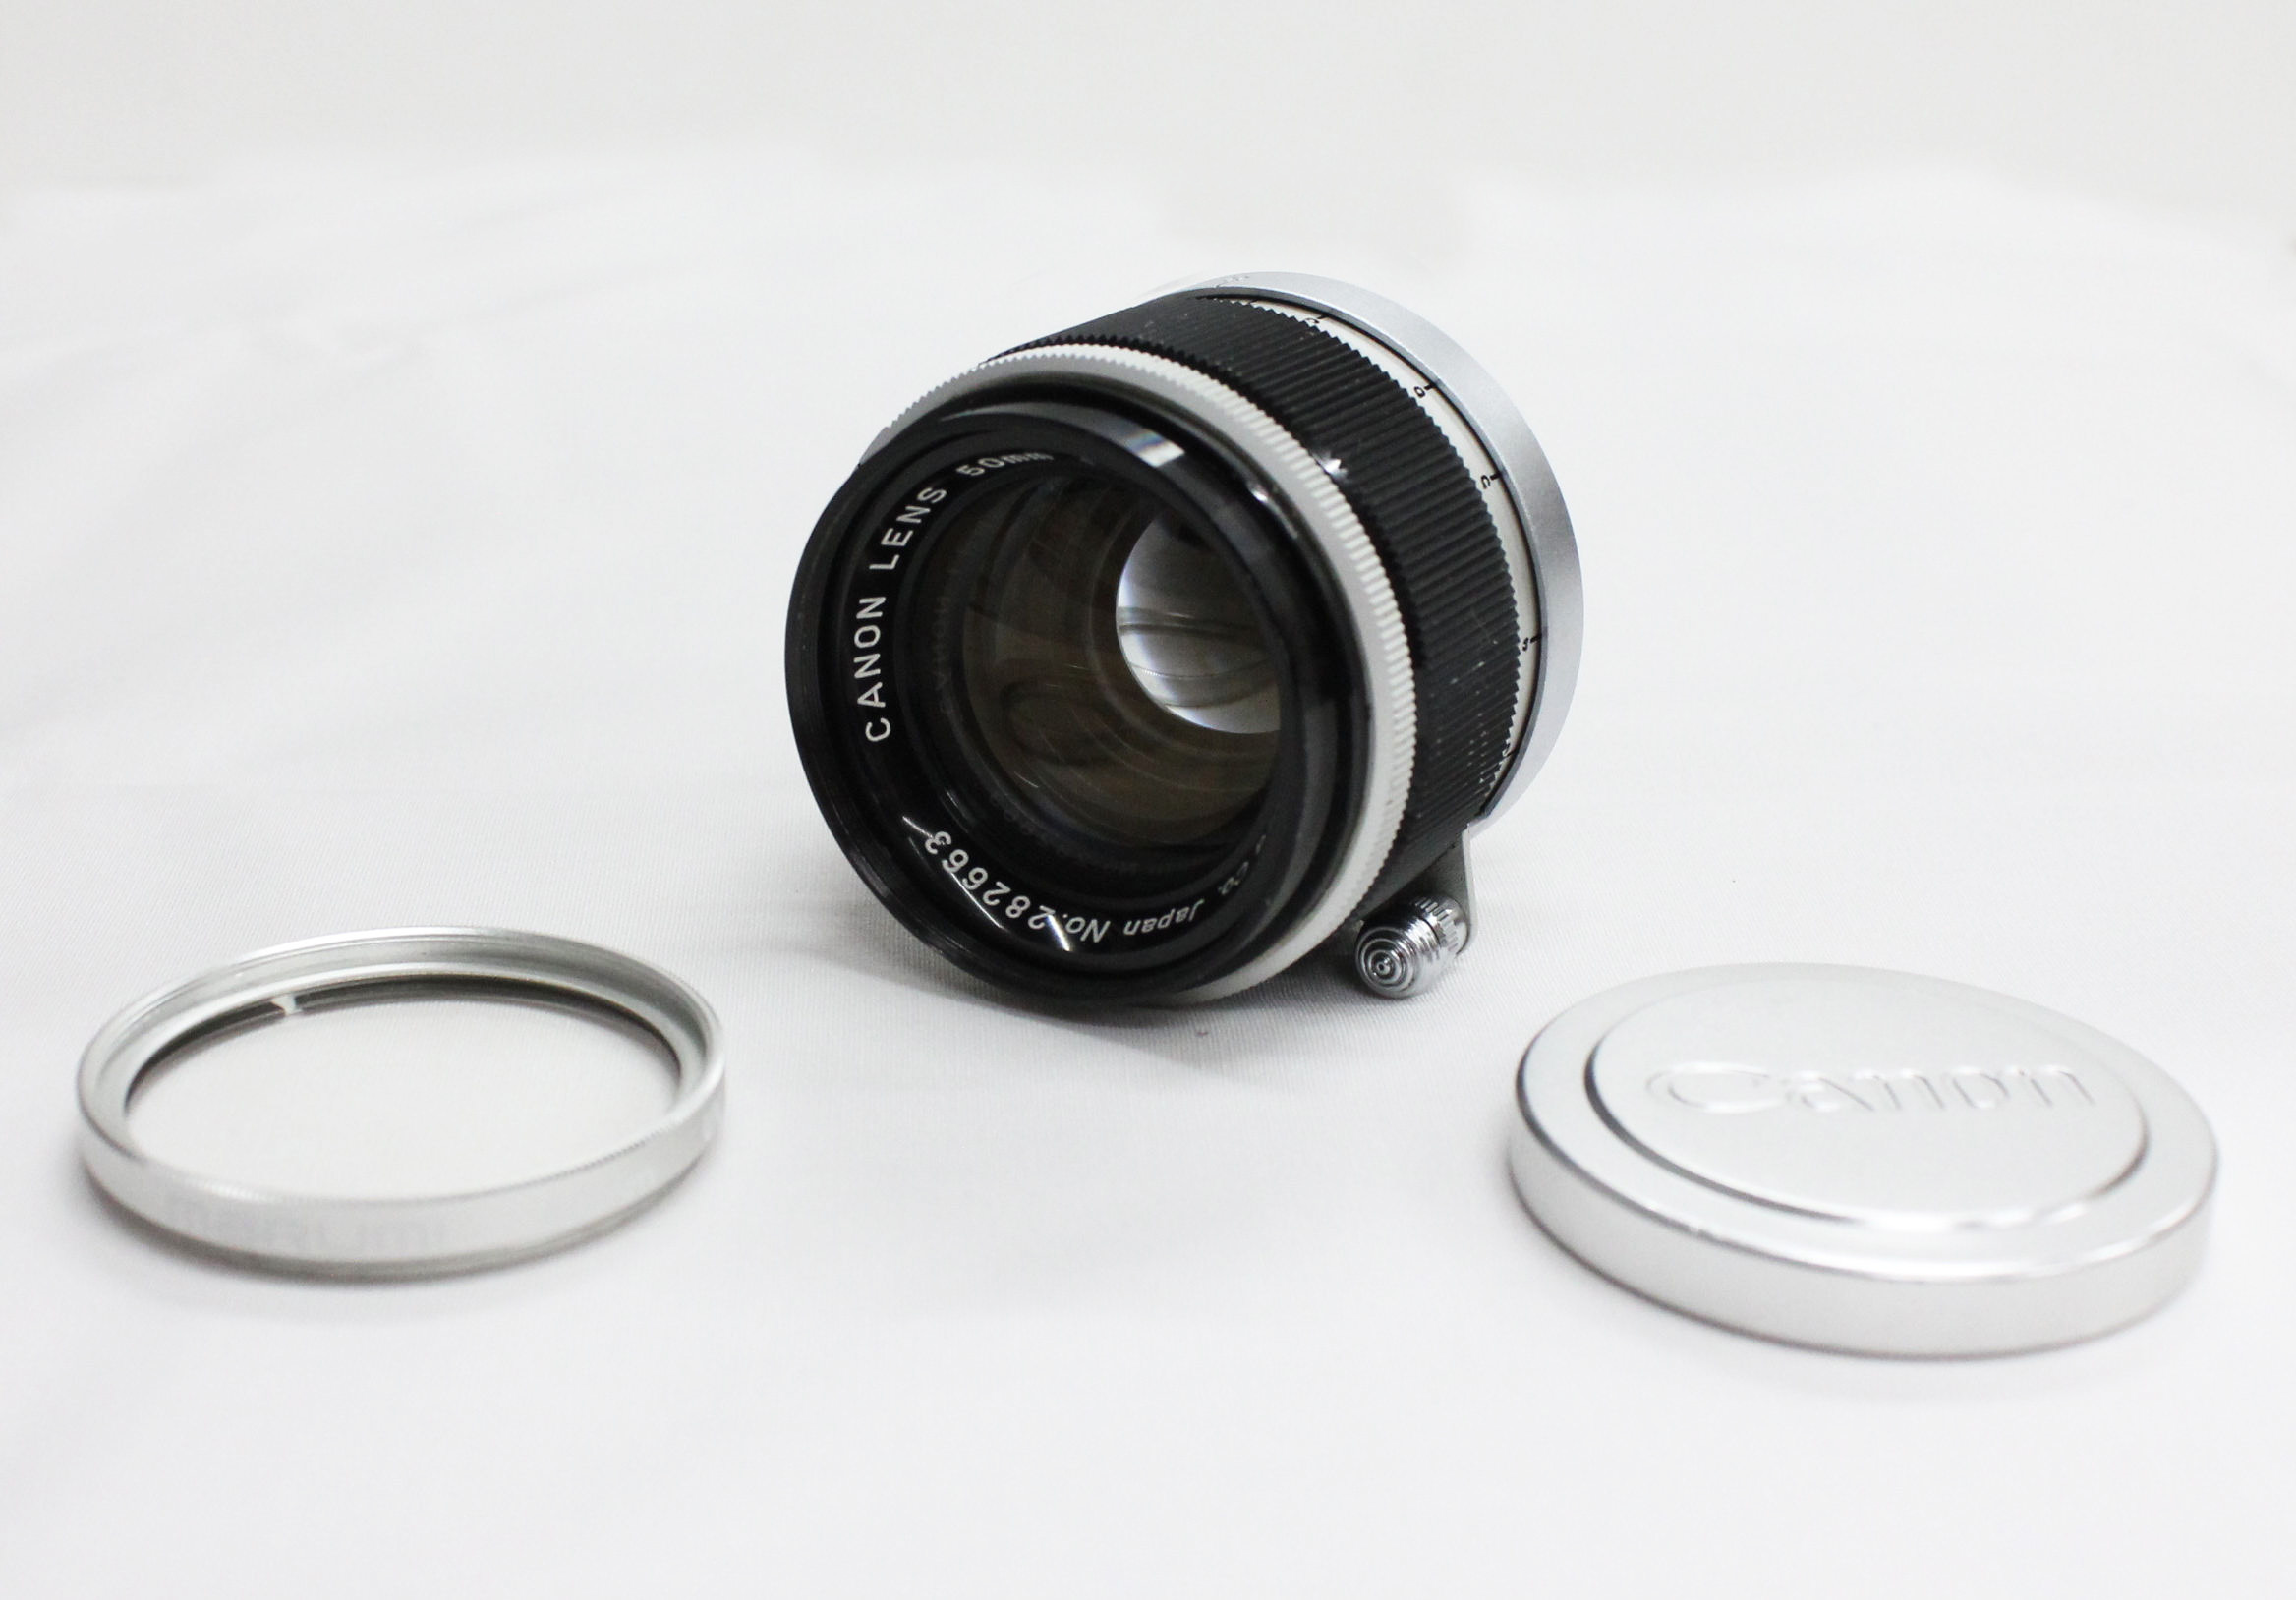 [Ex+] Canon 50mm F/1.8 Leica L39 Screw Mount Lens from Japan